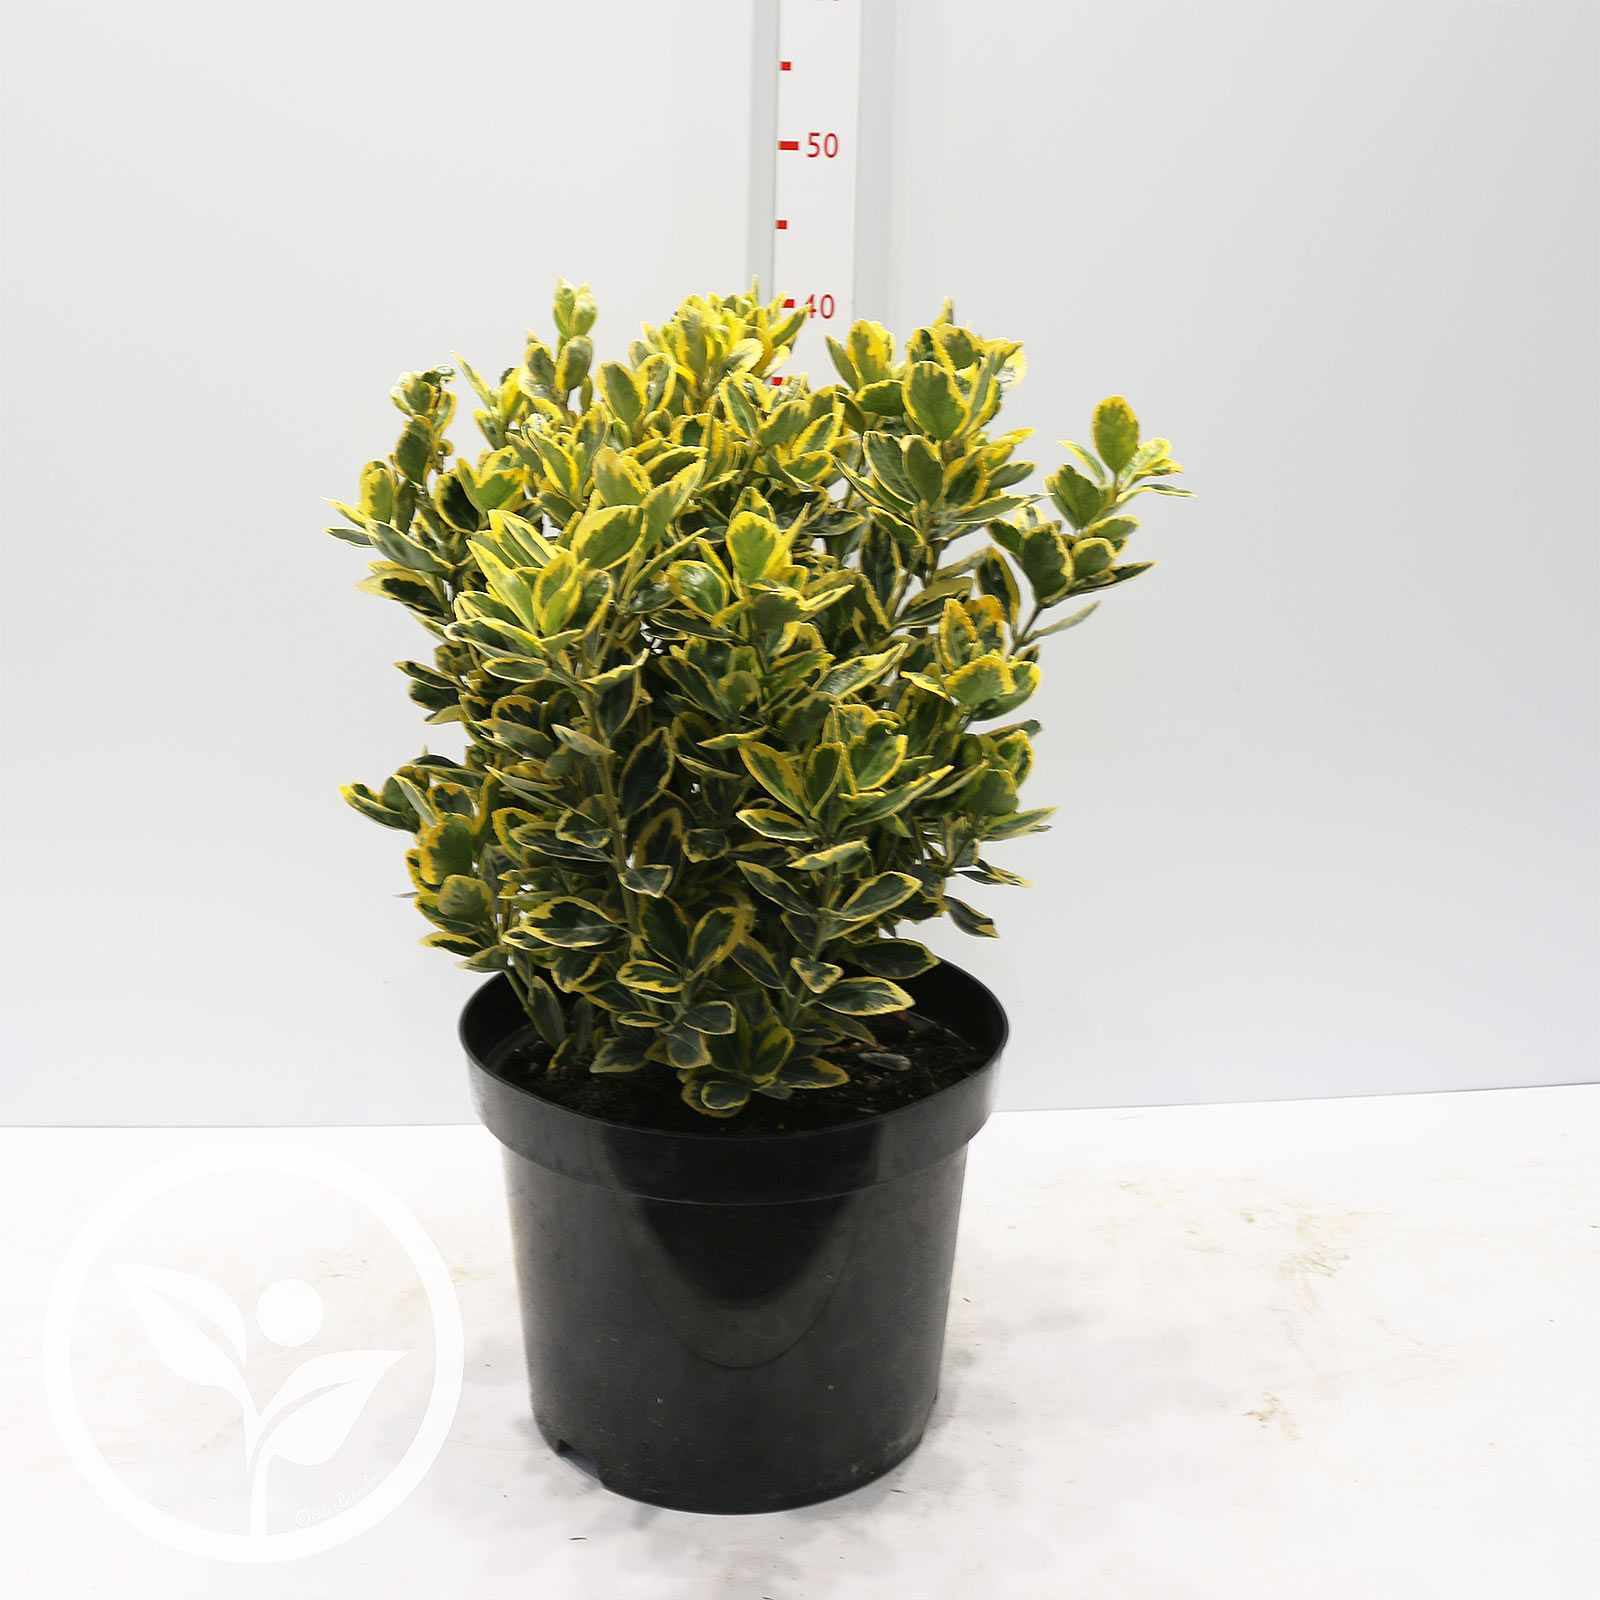 Image of Japanese euonymus plant in pot